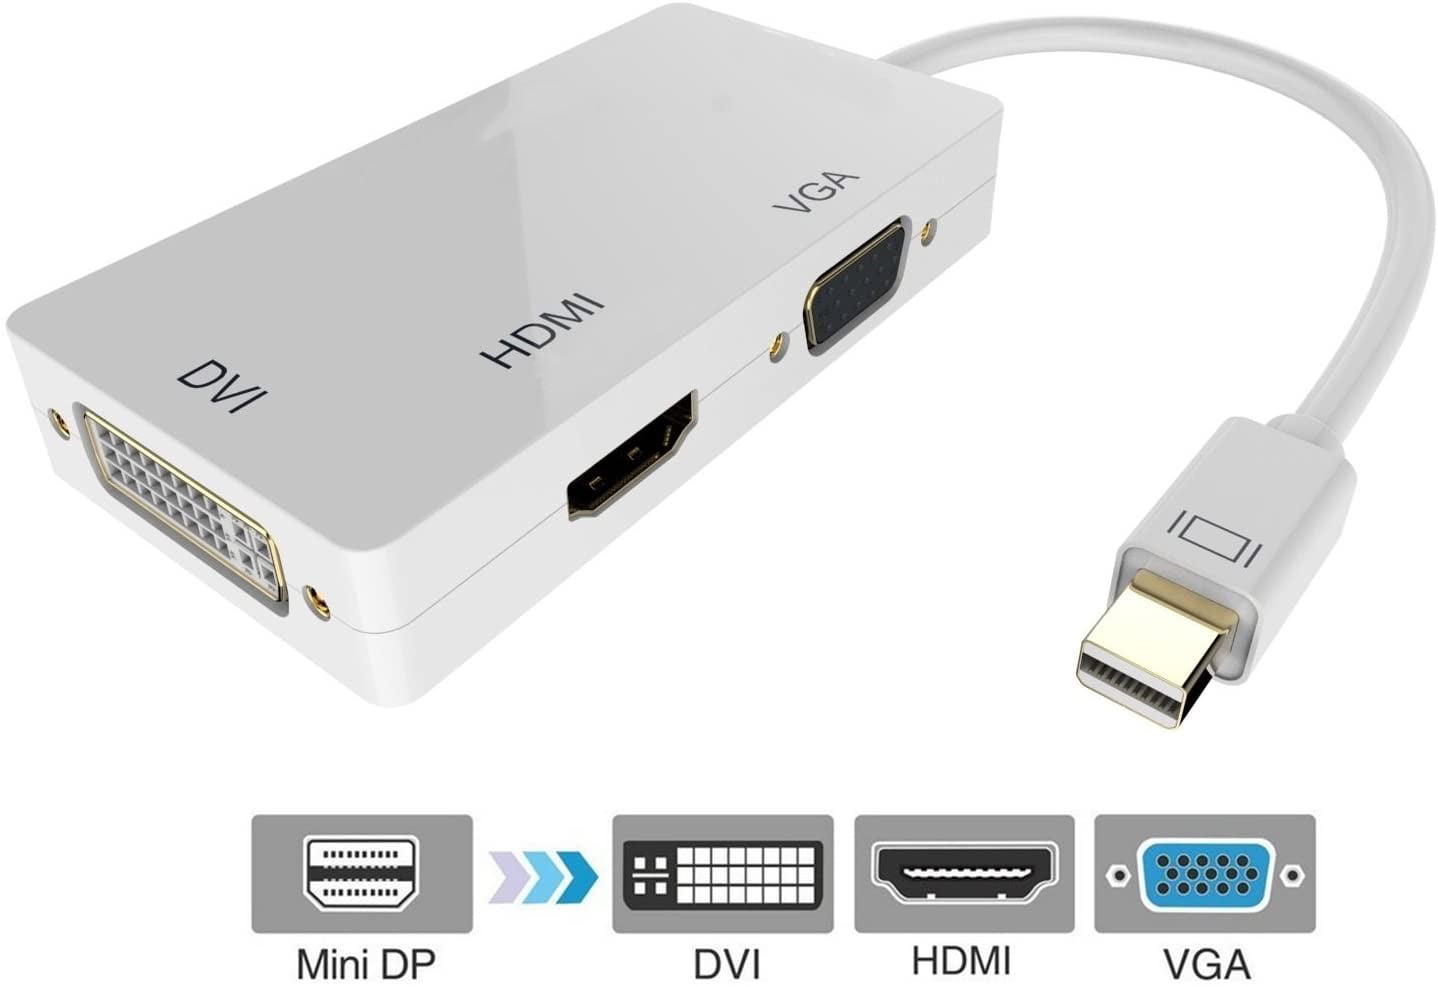 Display Port to DVI-D Adaptor DP 1.2 Male to DVI-D Female Adapter for 4K HD 3DTV 